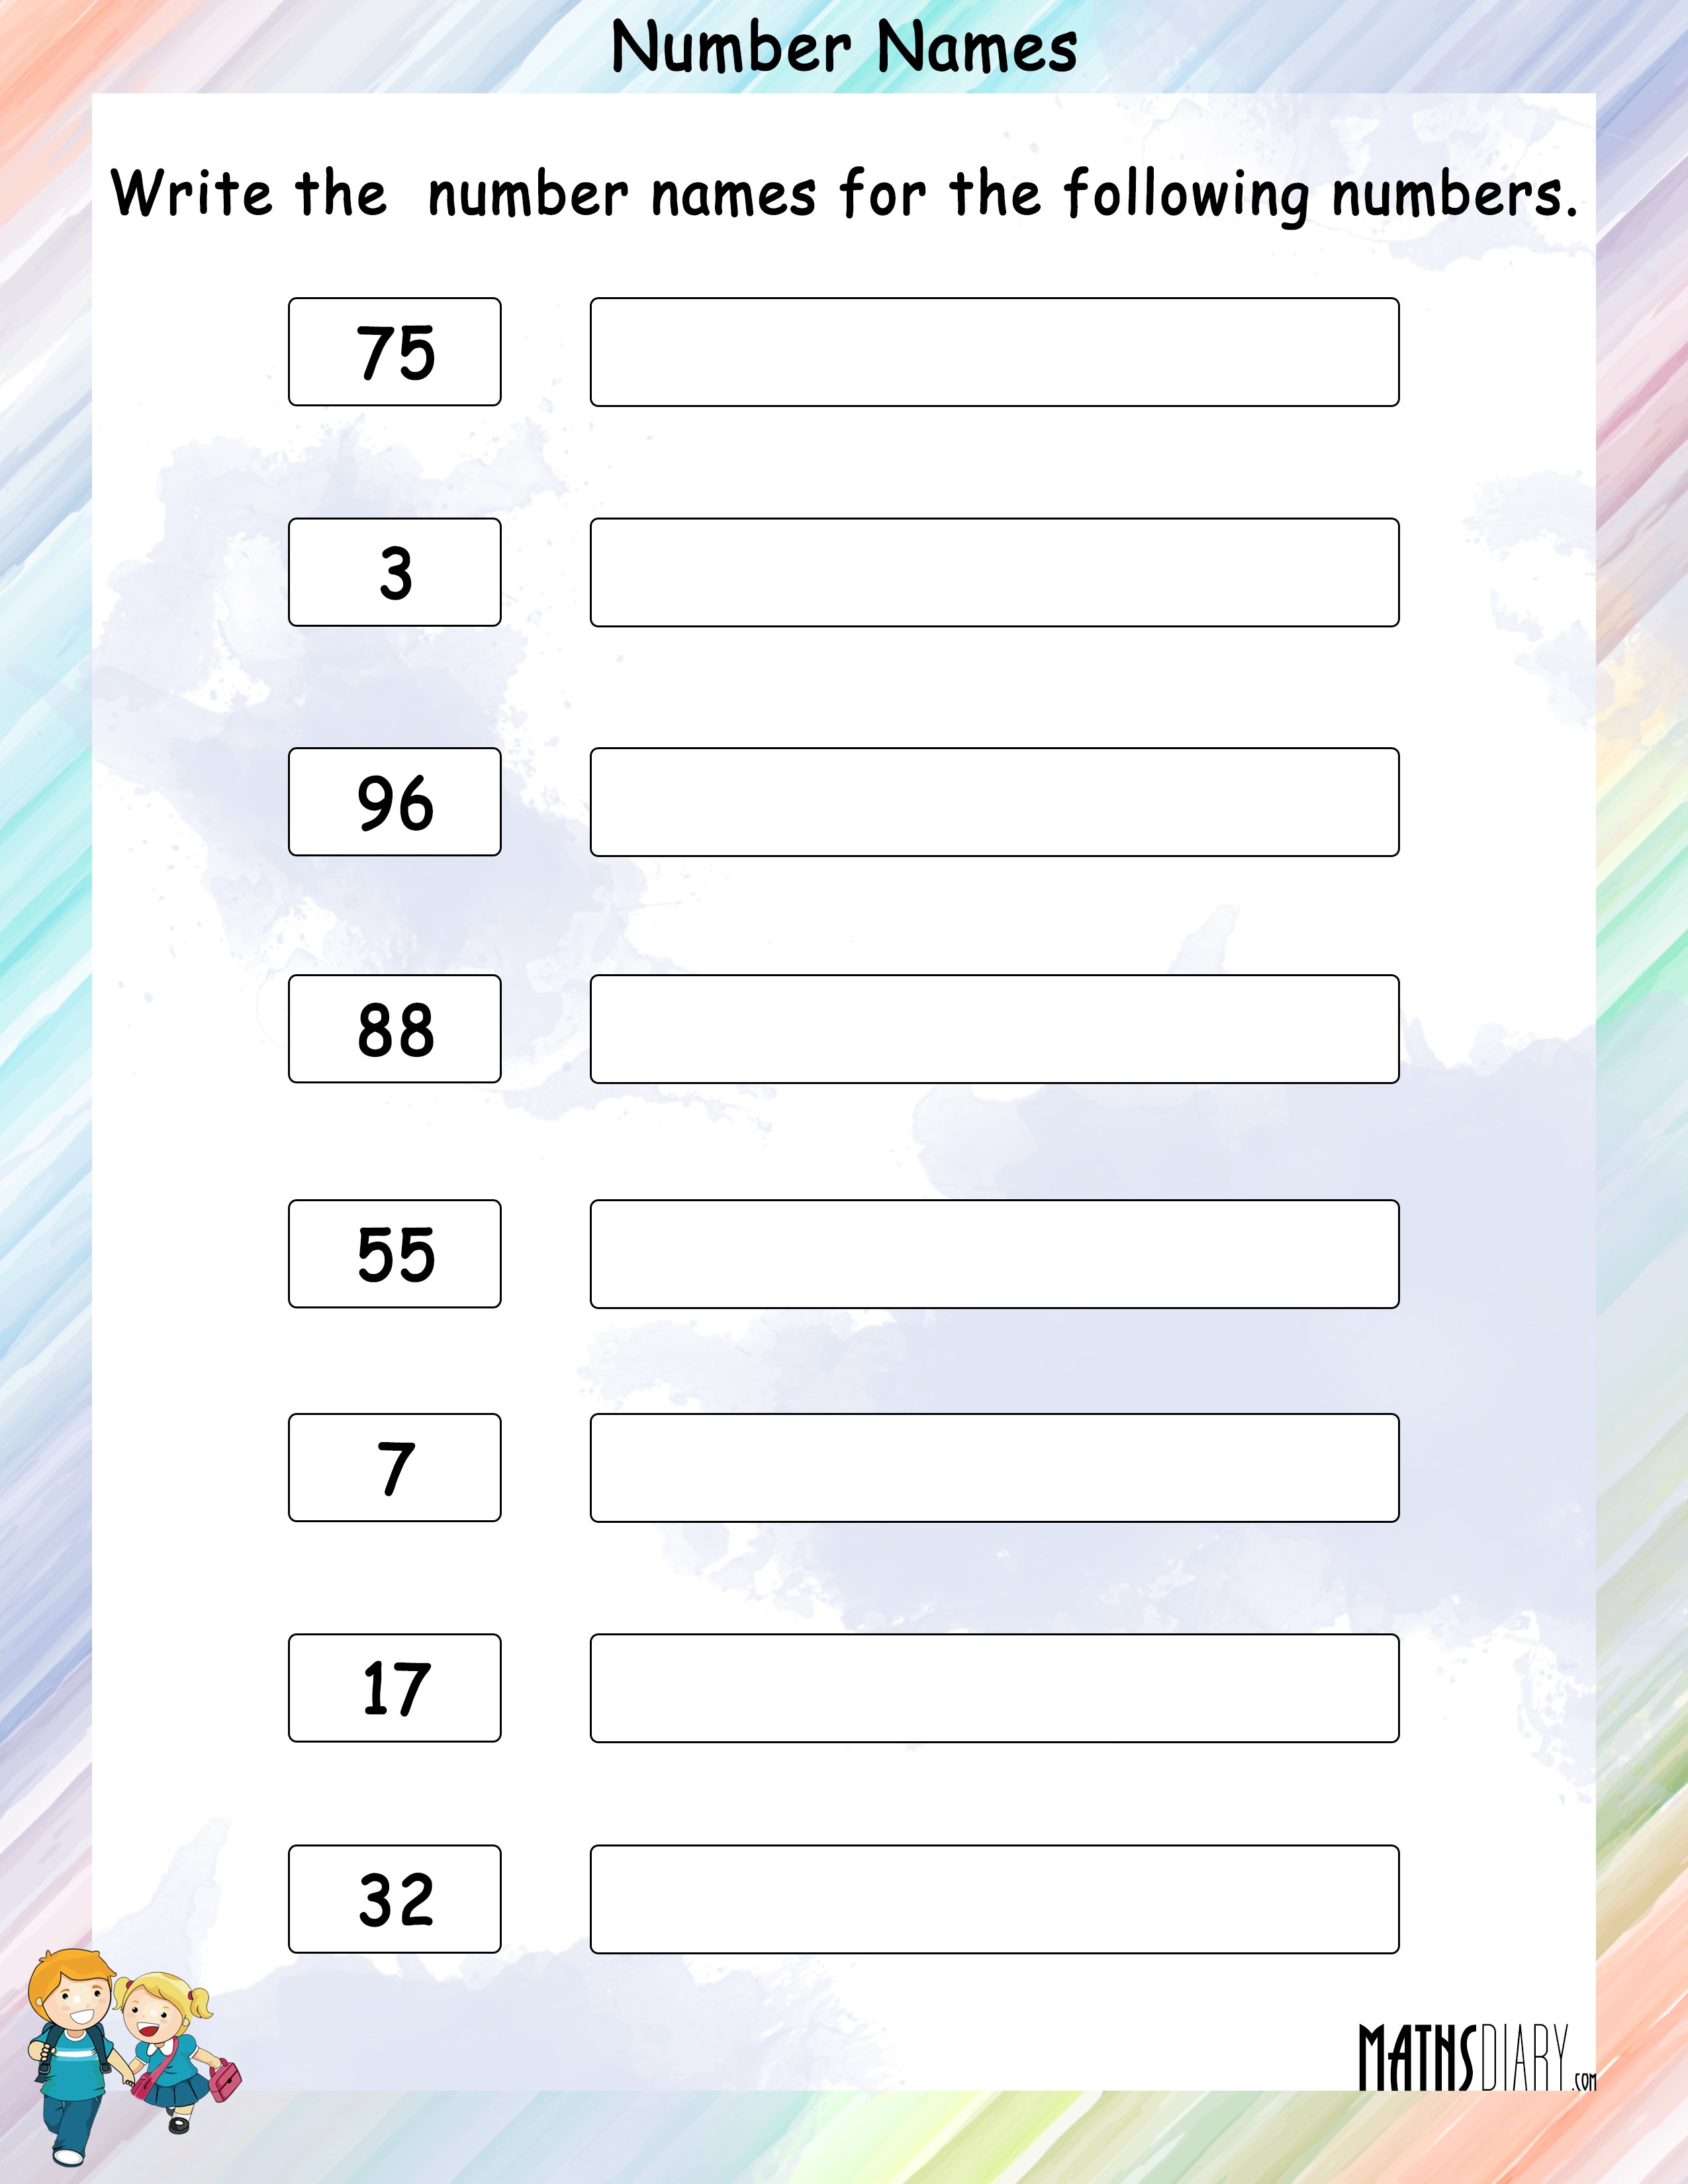 write number names for given numbers math worksheets mathsdiary com